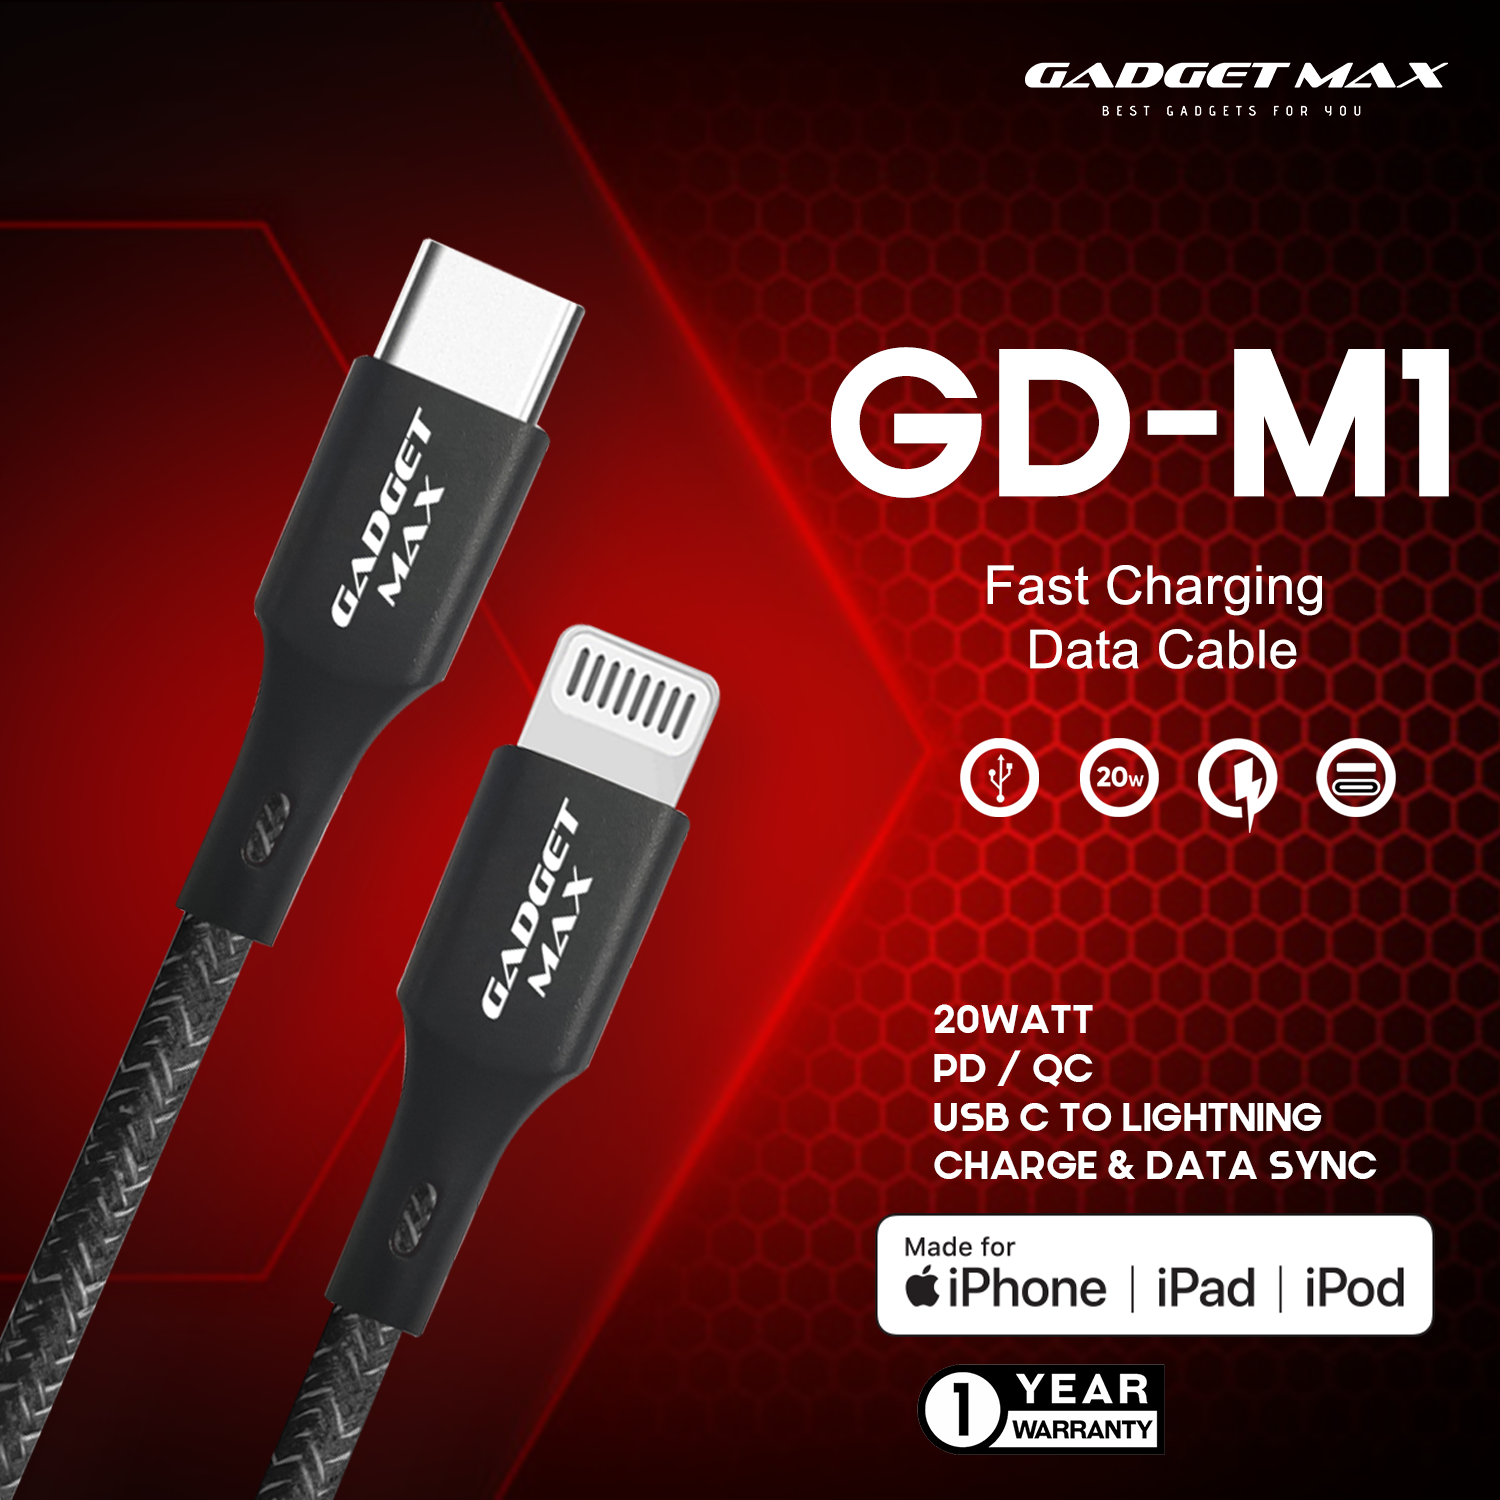 GADGET MAX USB-C TO LIGHTNING MFI FAST CHARGE & DATA SYNC CABLE GD-M1 PD/QC 20W(3A)(1200mm), MFI Cable, Lighting Cable, USB to Lighting Cable, iPhone Cable, Fast Charge